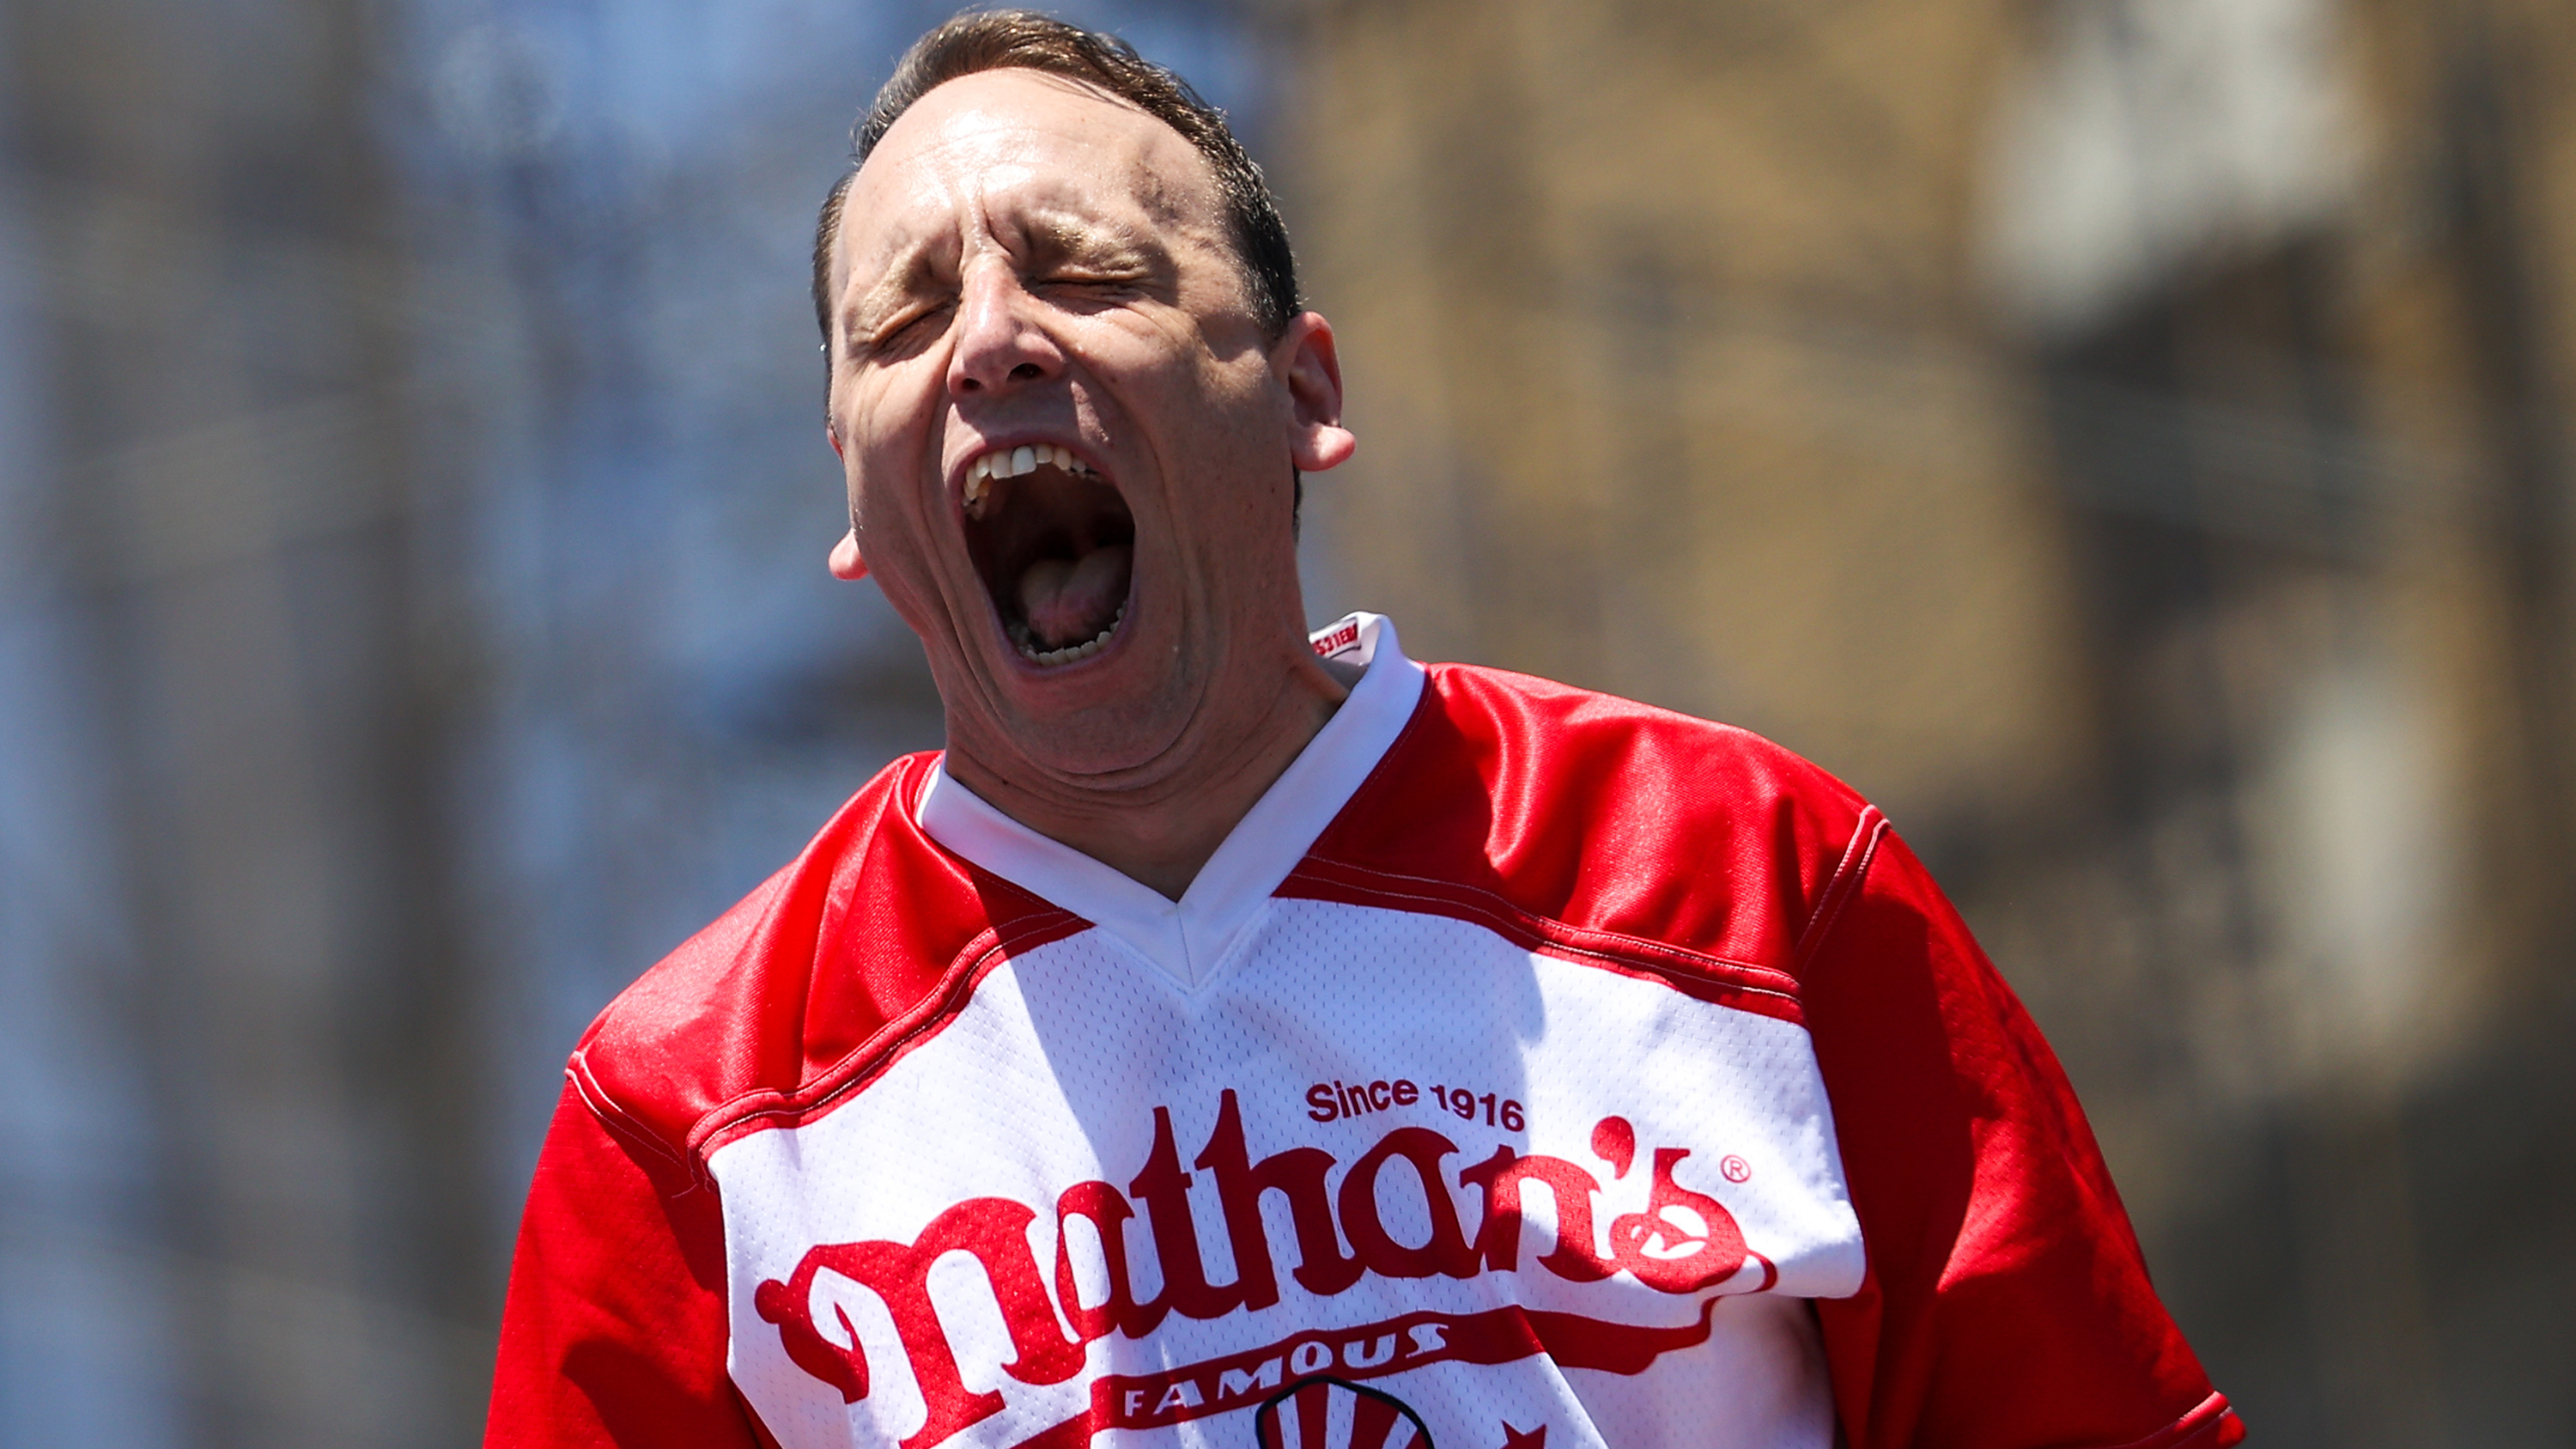 Joey Chestnut competitive eater